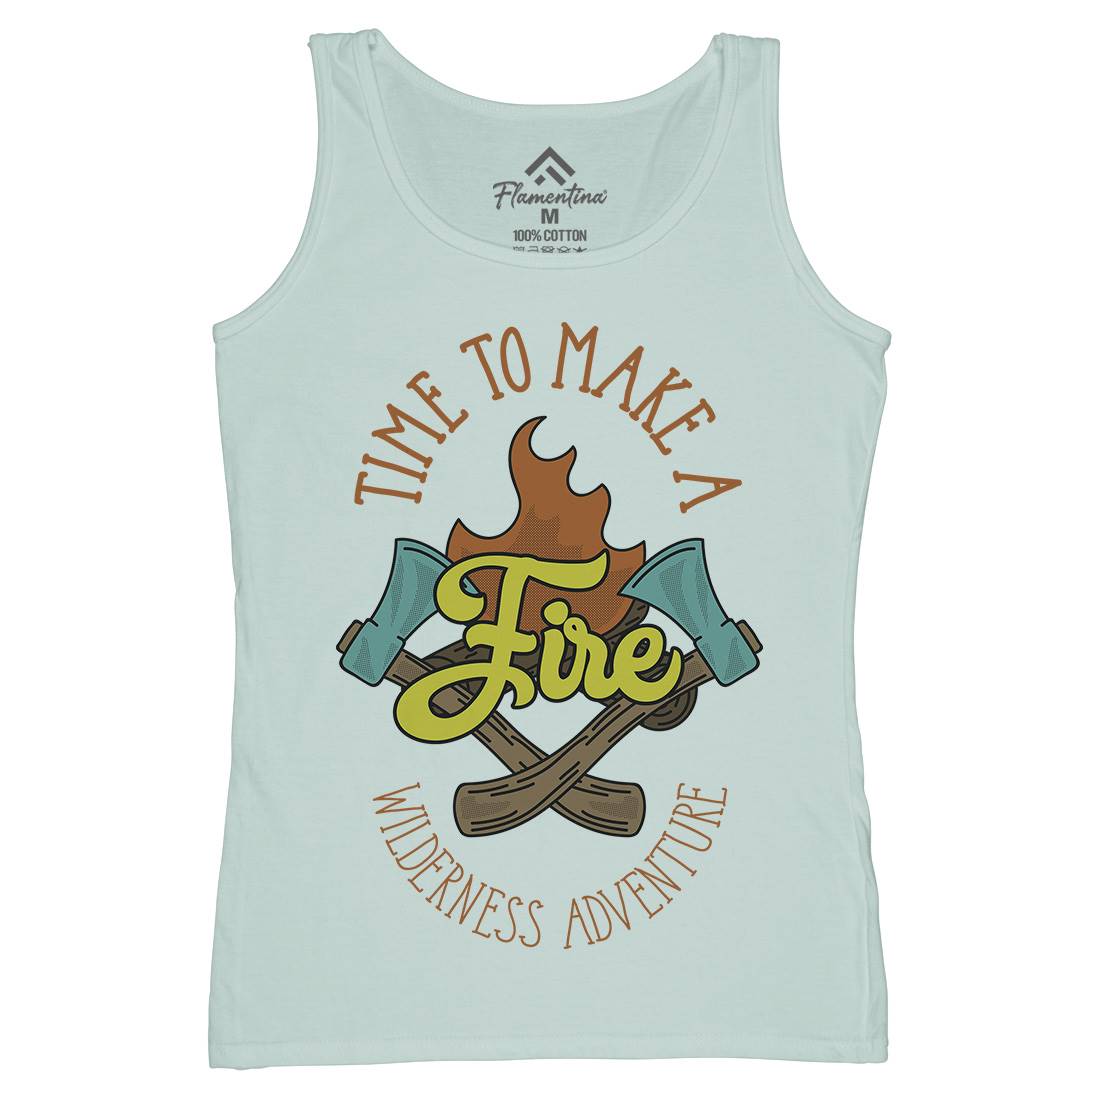 Time To Make Fire Womens Organic Tank Top Vest Nature D992